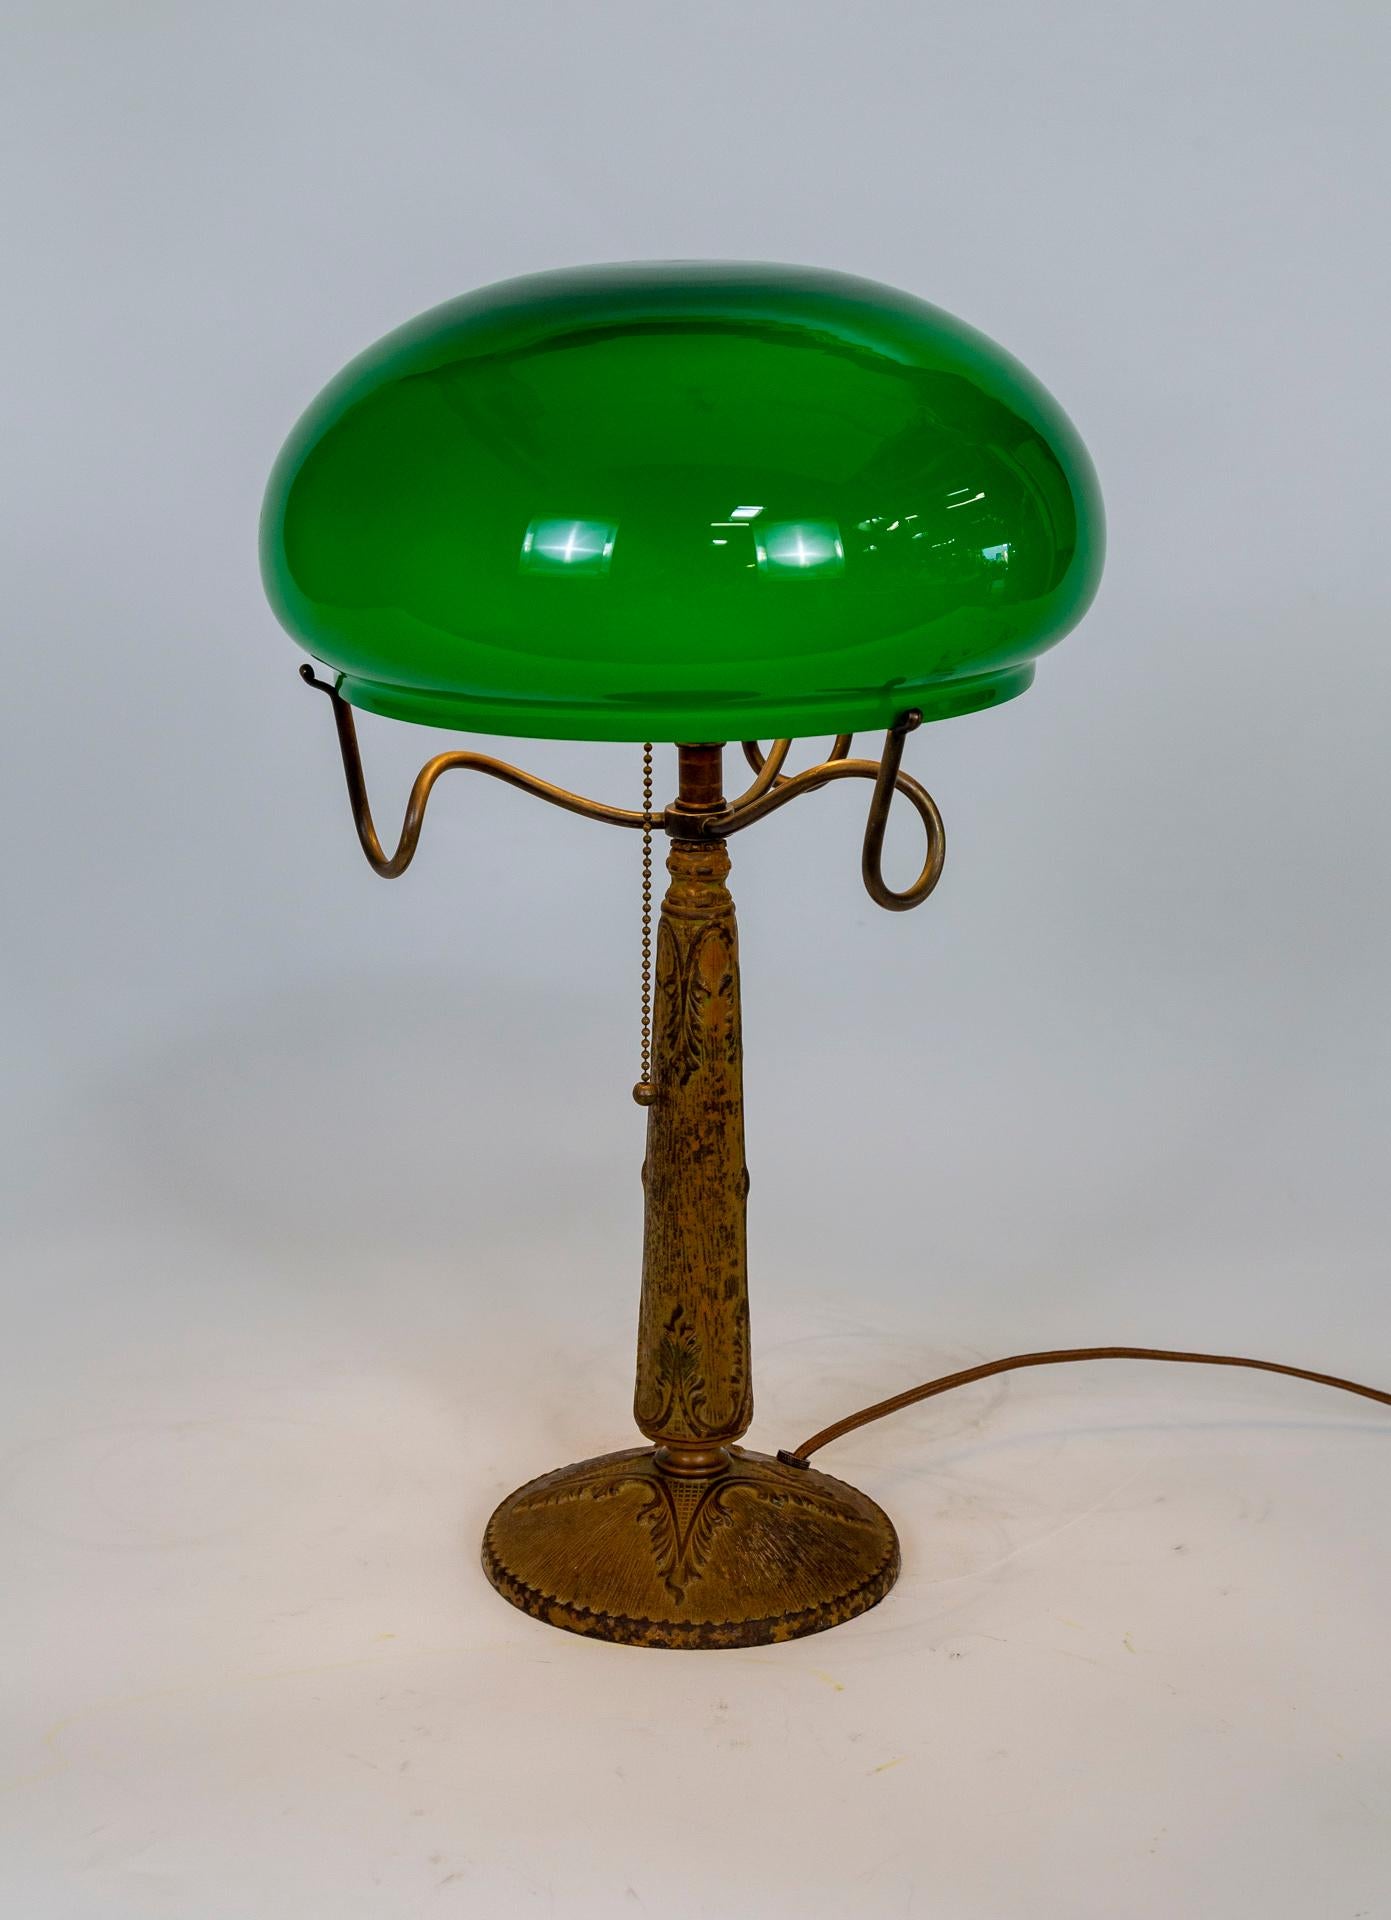 Textured Cast Metal Nouveau Lamp w/ Green Glass Shade & Curled Shade Holder In Good Condition For Sale In San Francisco, CA